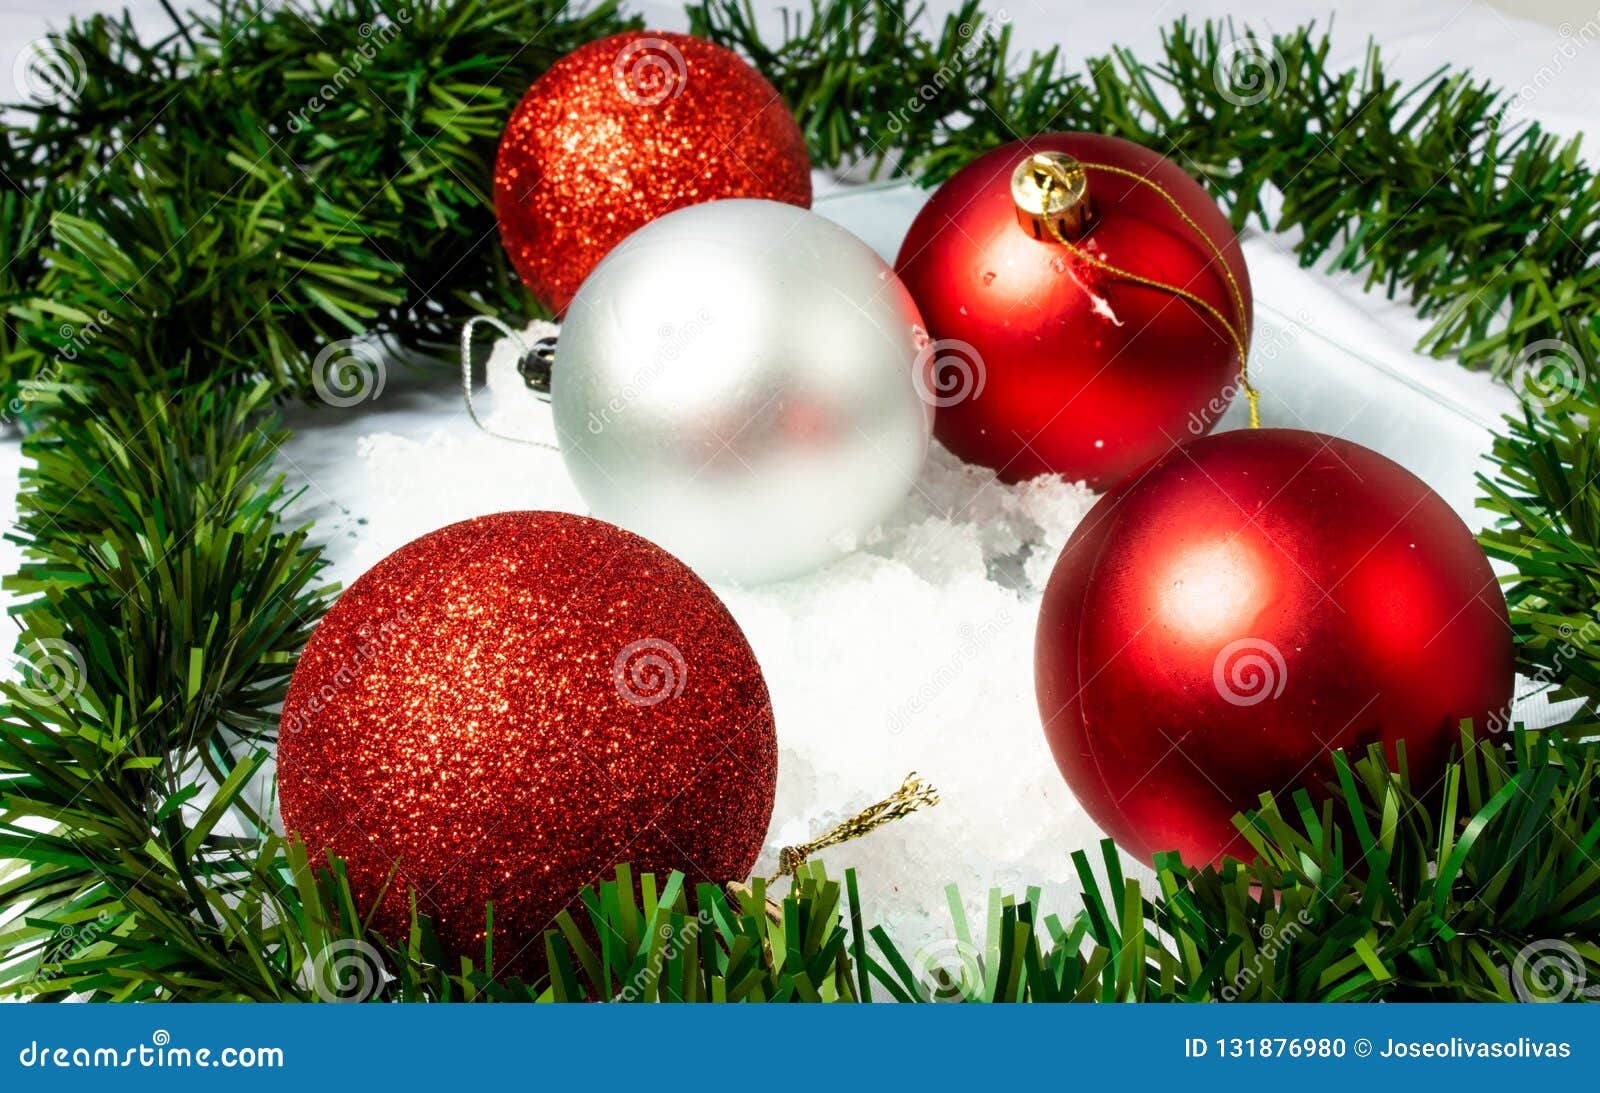 Bright Christmas Spheres a Hope Stock Photo - Image of hope, pattern ...